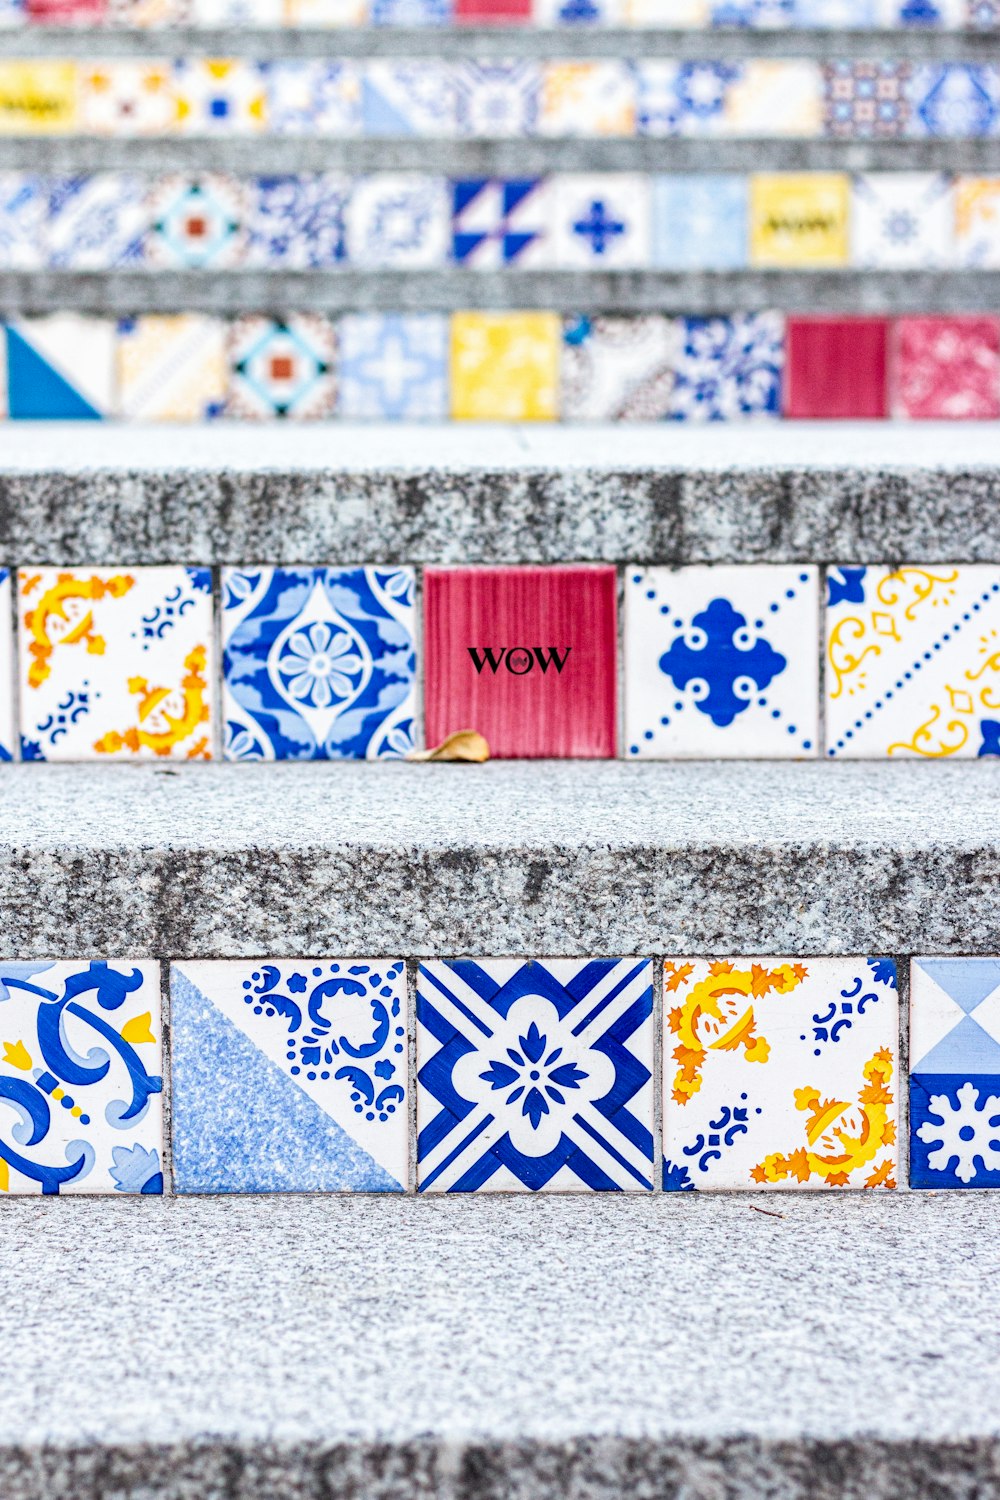 a close up of a set of stairs with colorful tiles